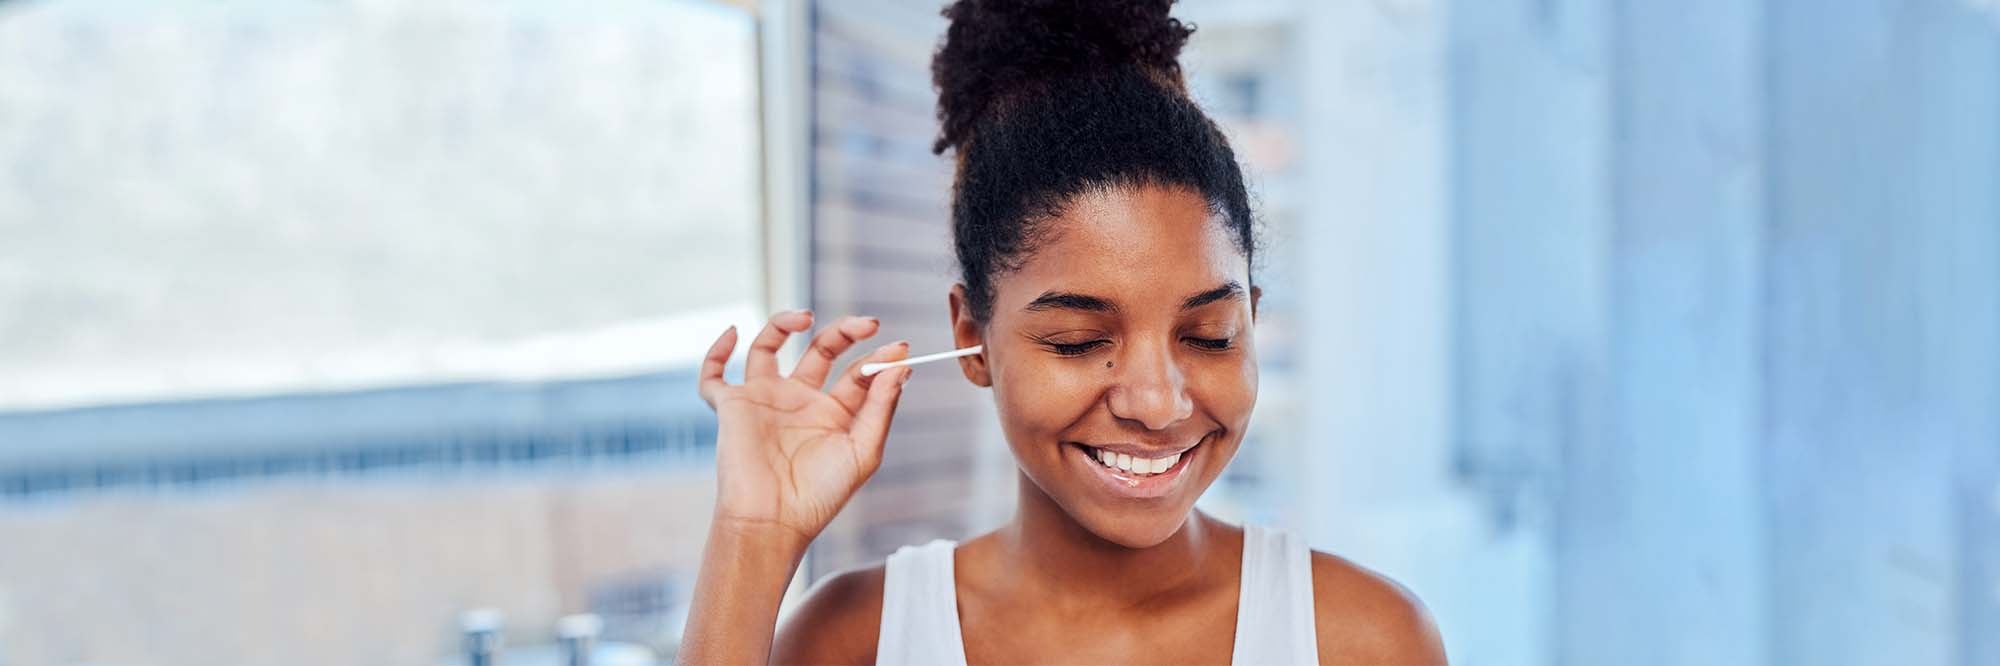 Are Q-tips bad? How to safely keep your ears clean